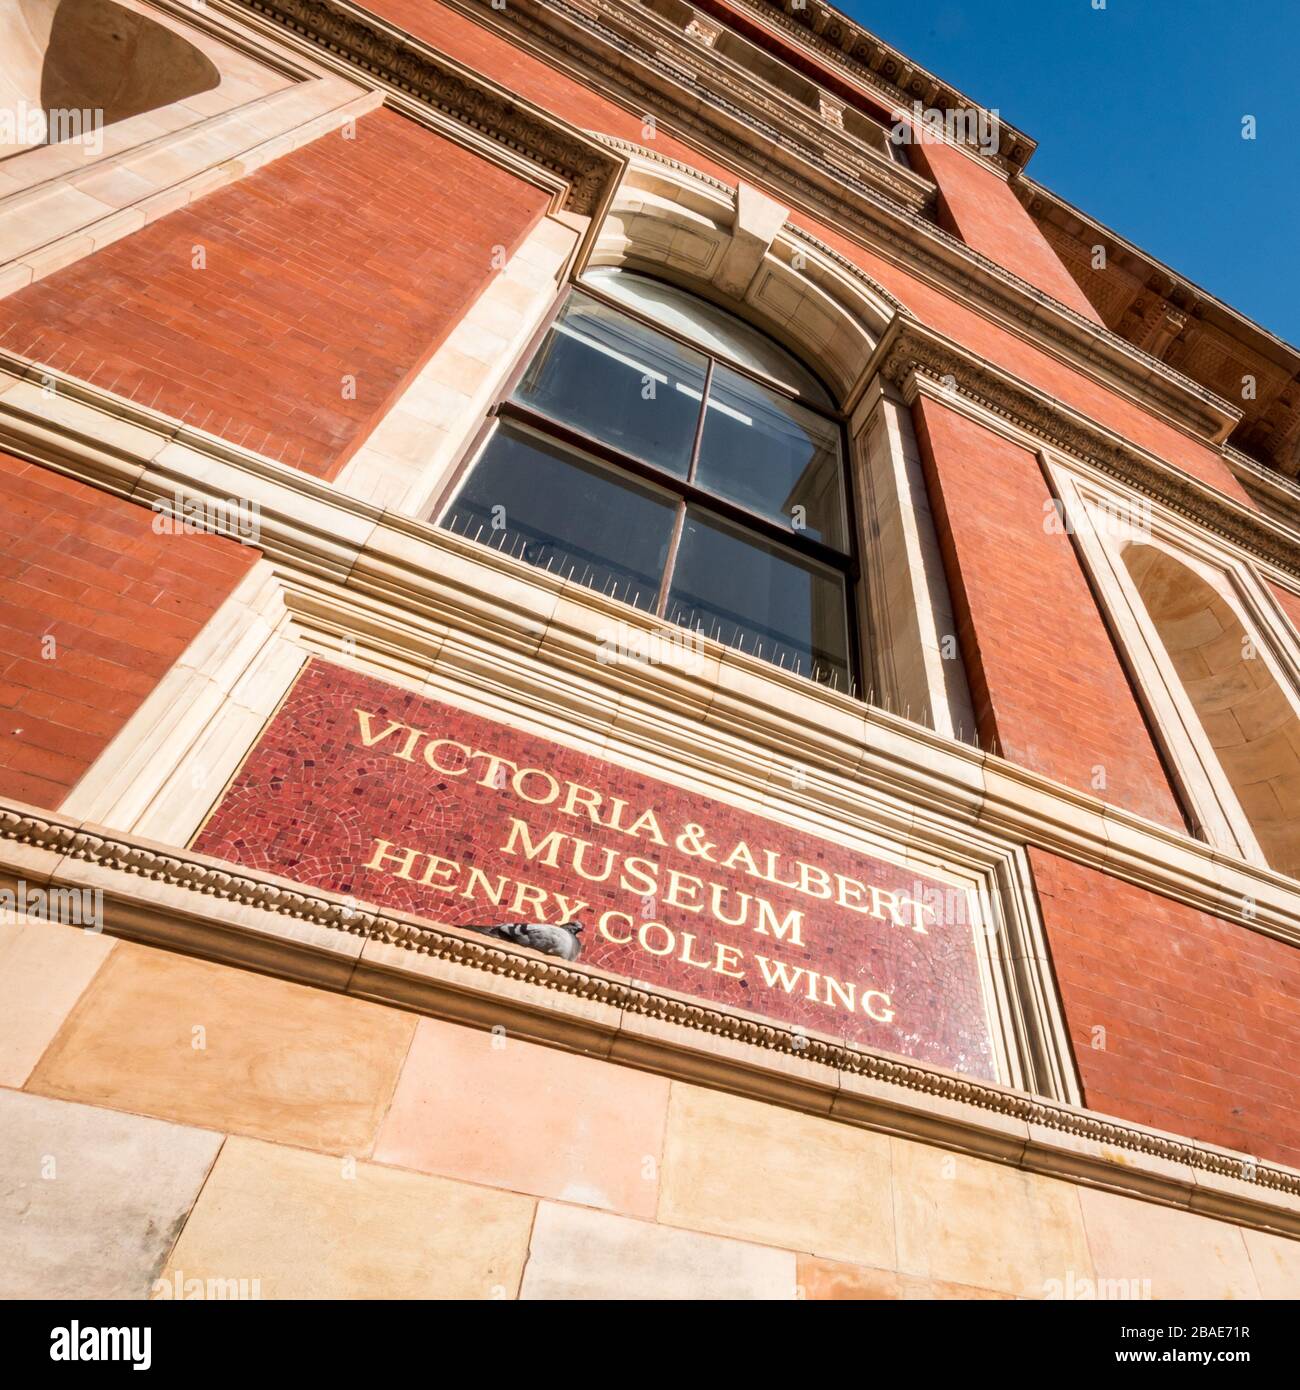 Henry Cole Wing, Victoria & Albert Museum, London. A sign on the side of the popular South Kensington museum in West London. Stock Photo